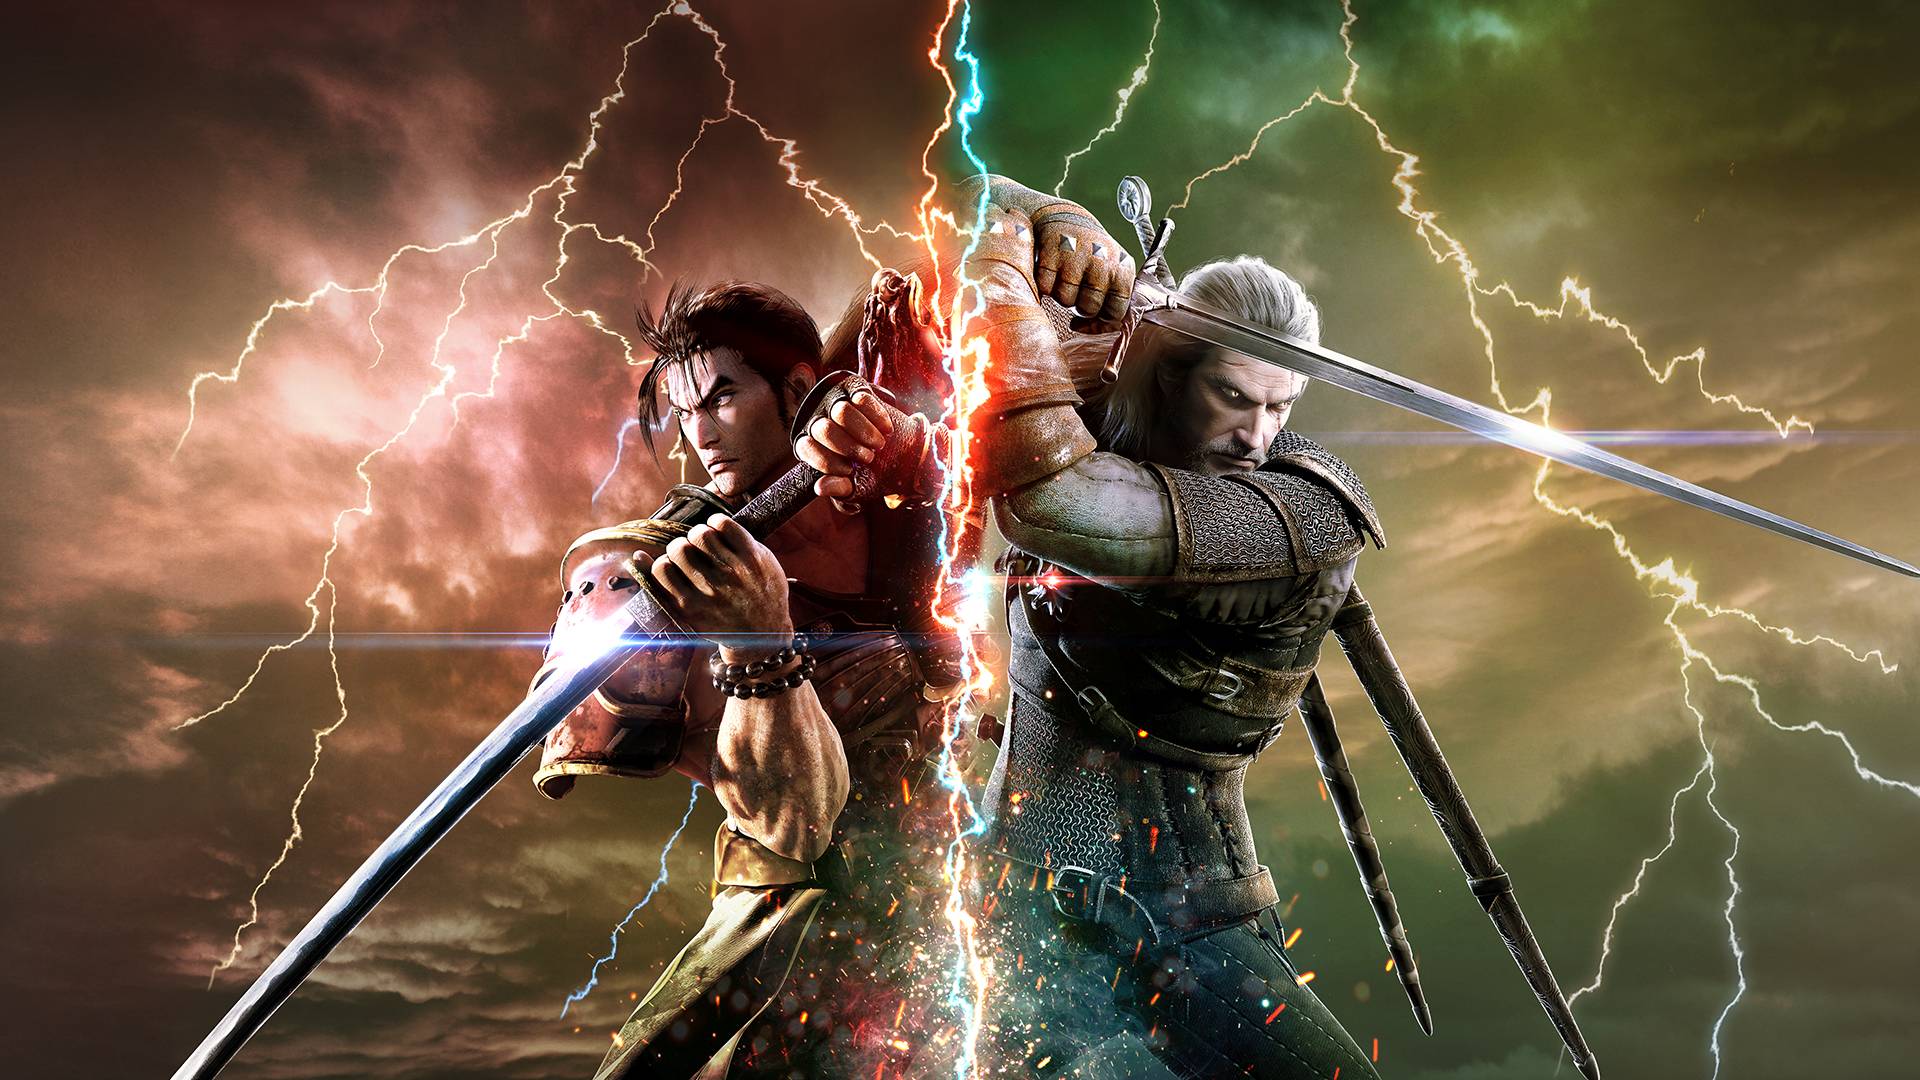 Soul Calibur 5s singleplayer modes disappoint  VentureBeat